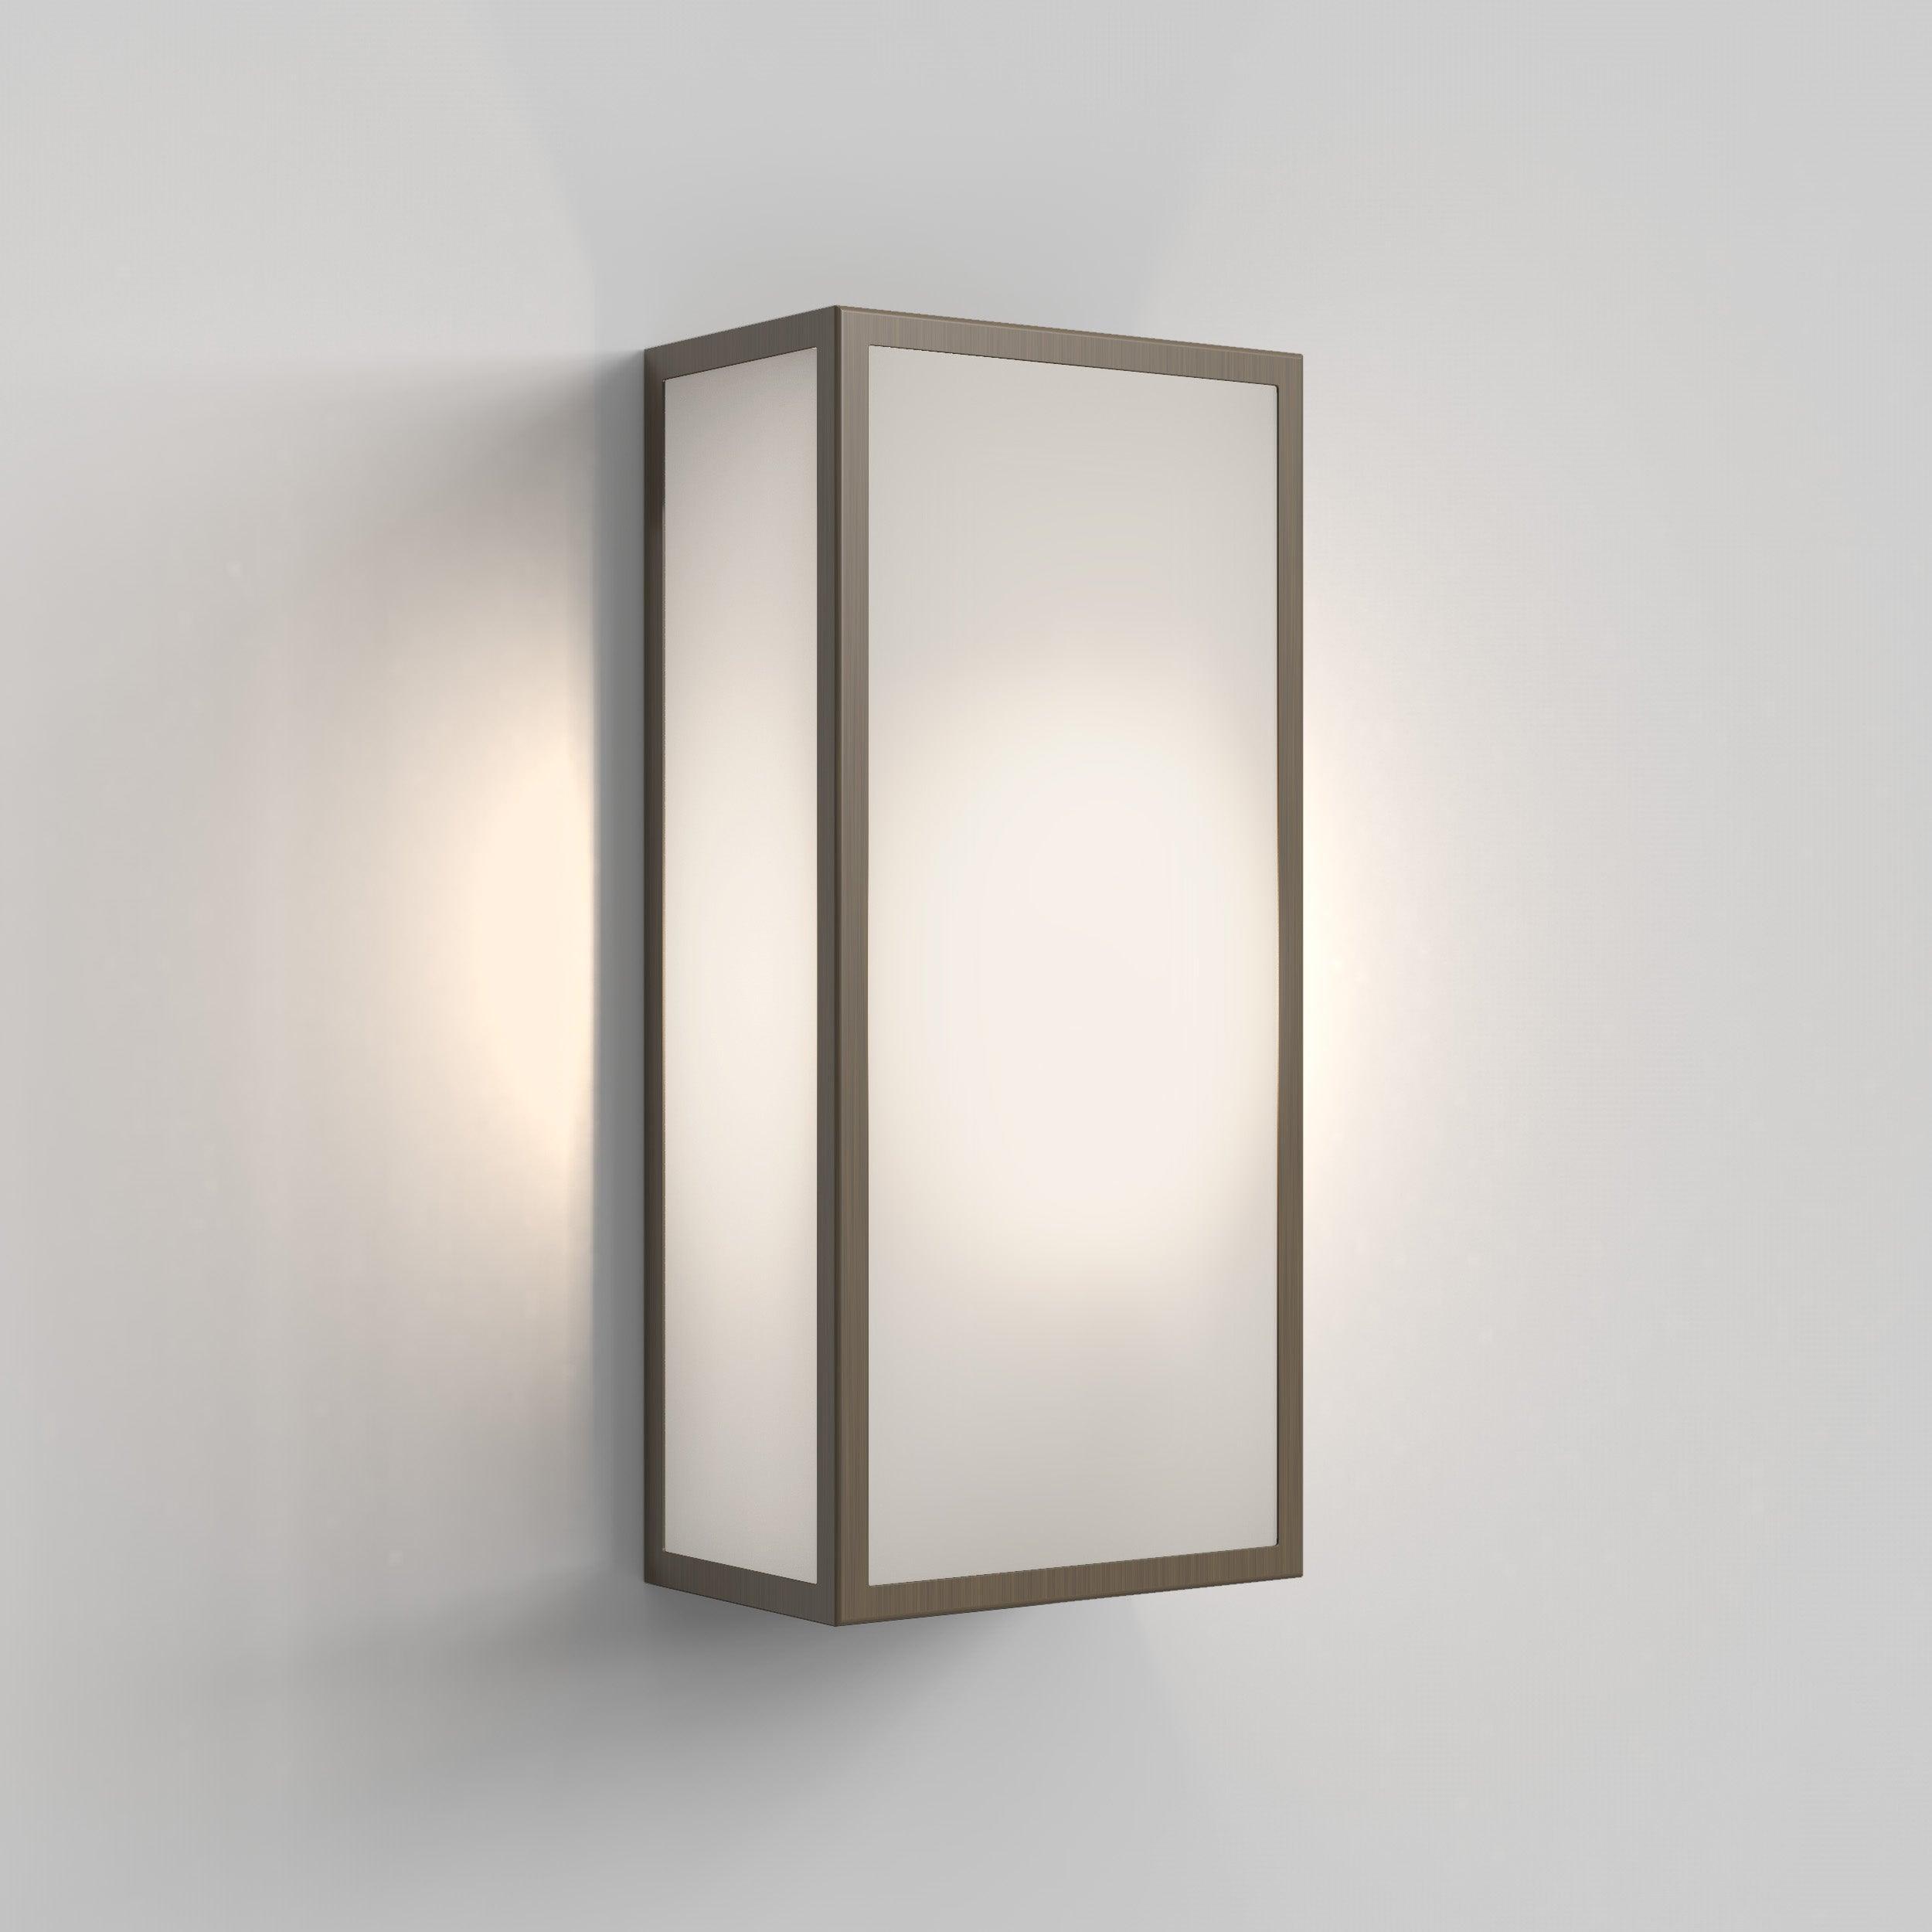 Astro Lighting - Messina Frosted Wall Light - 1183012 | Montreal Lighting & Hardware